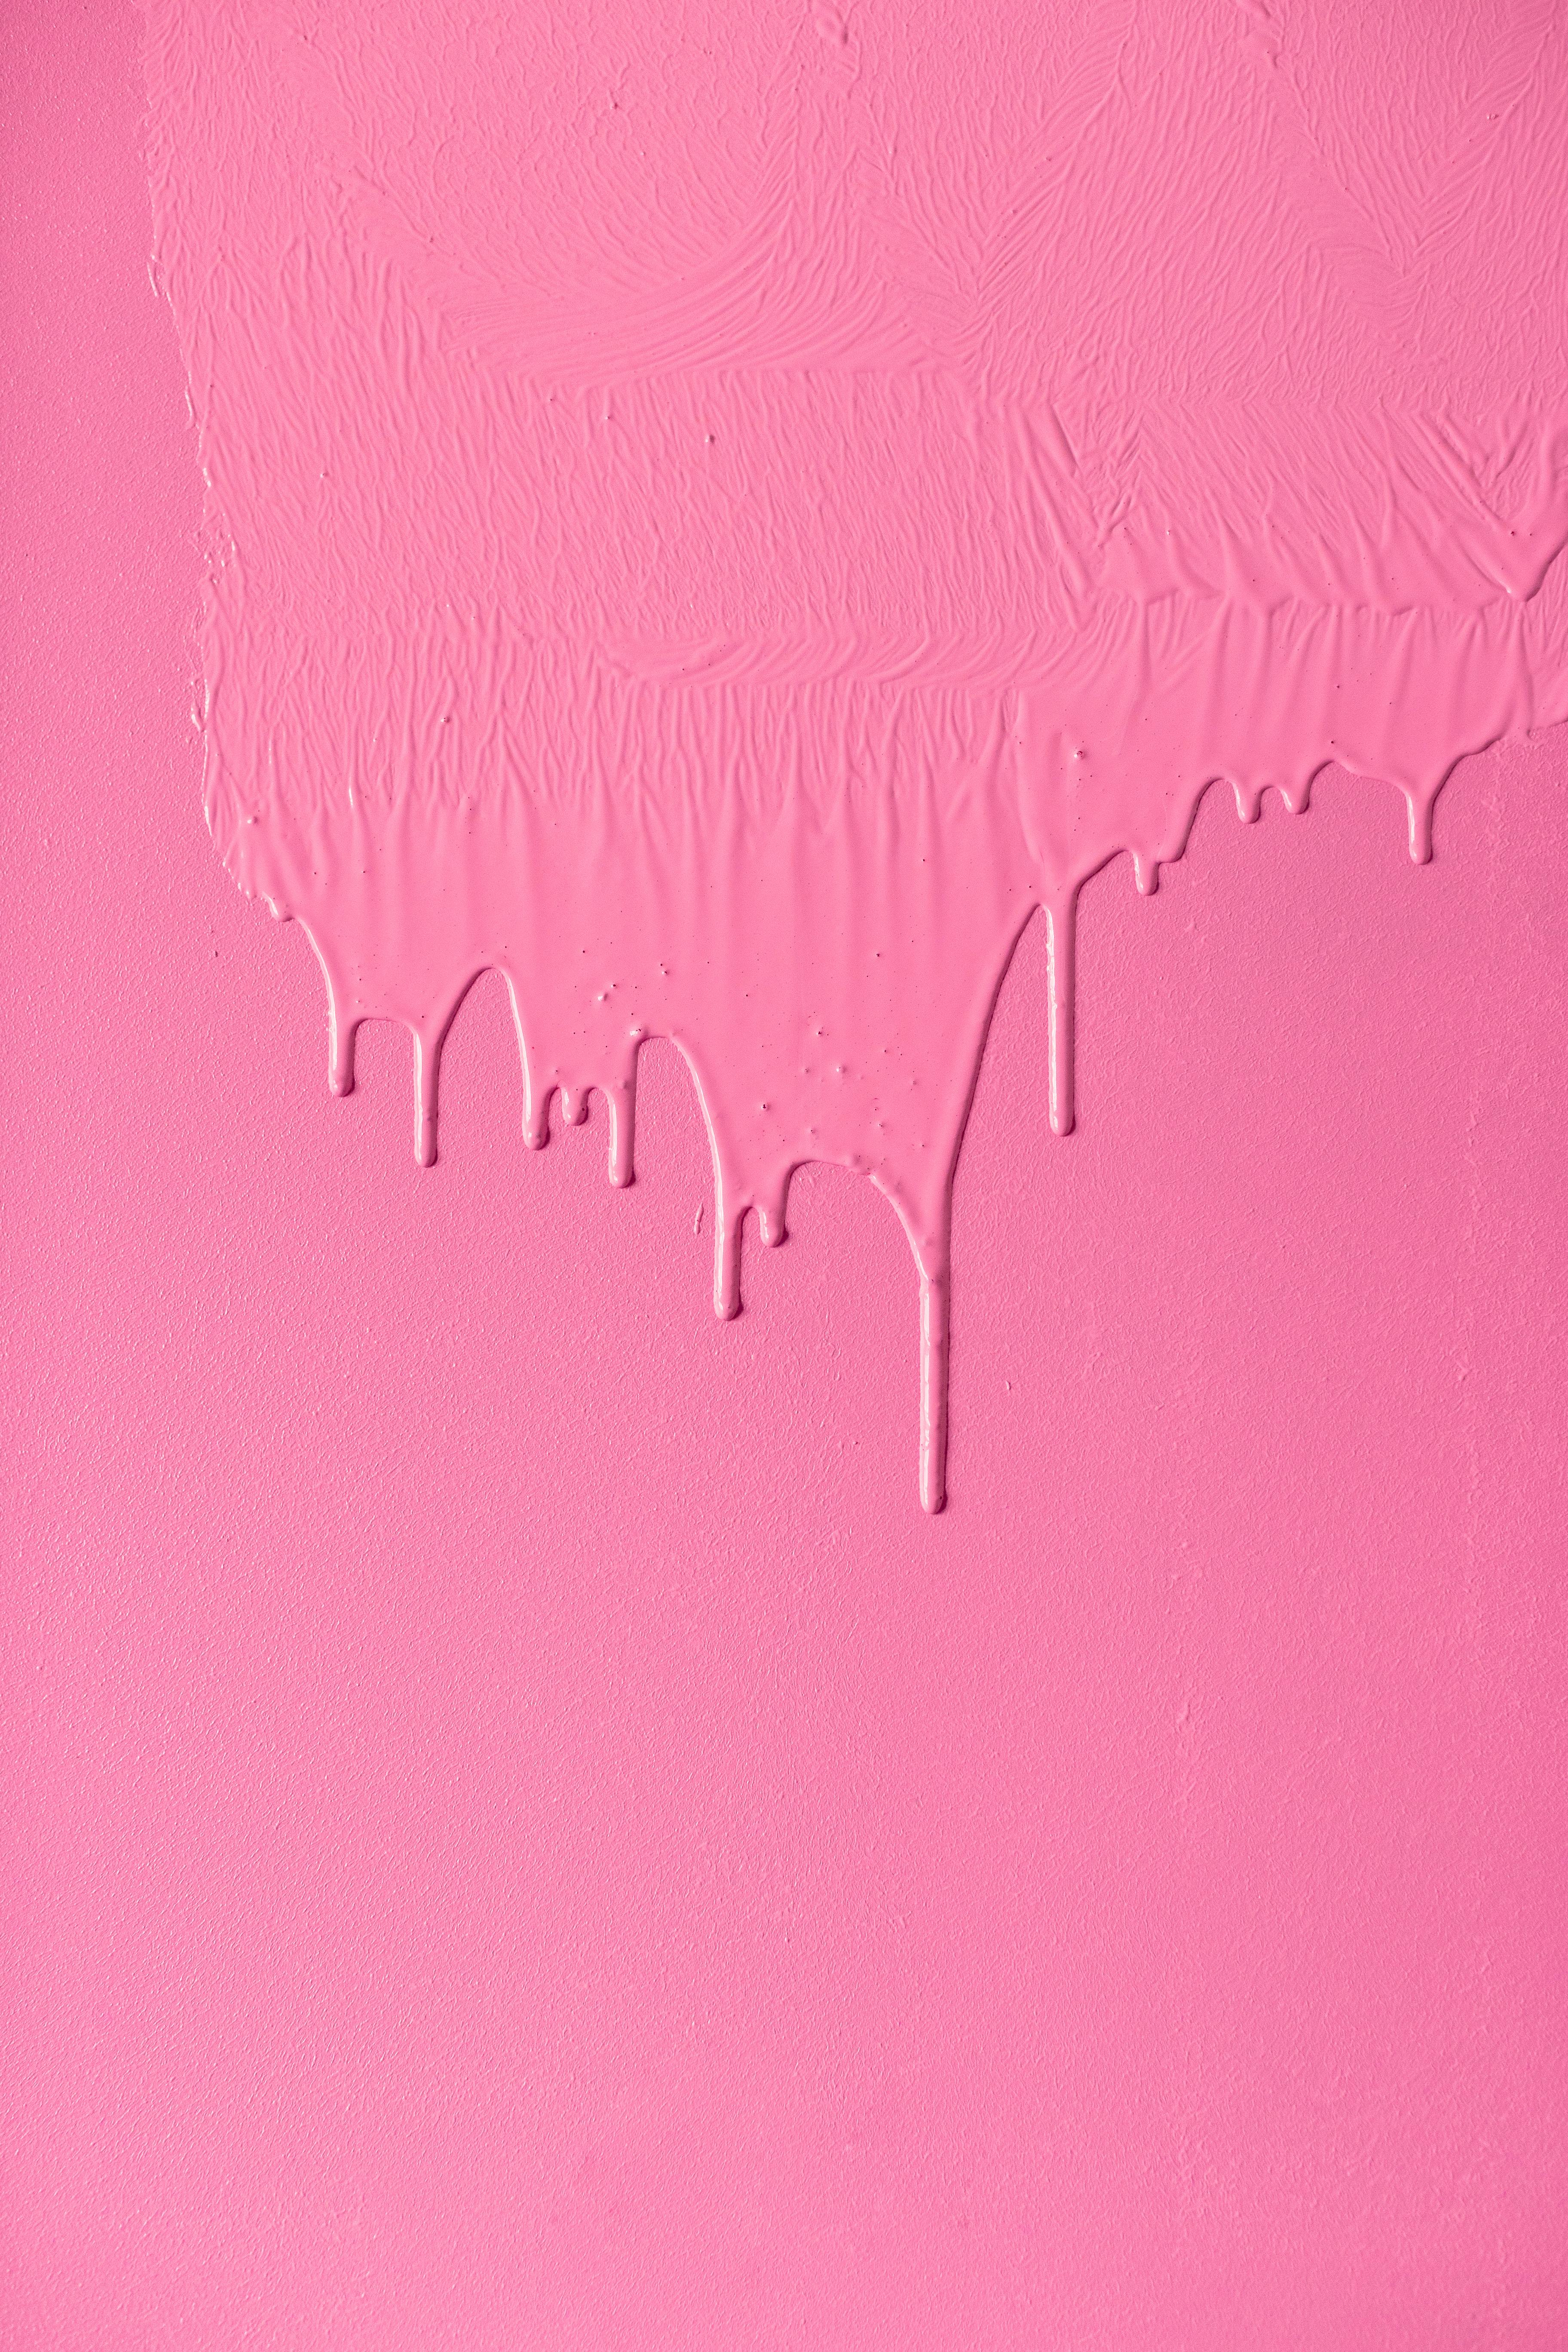 Pink Paint Dripping · Free Stock Photo